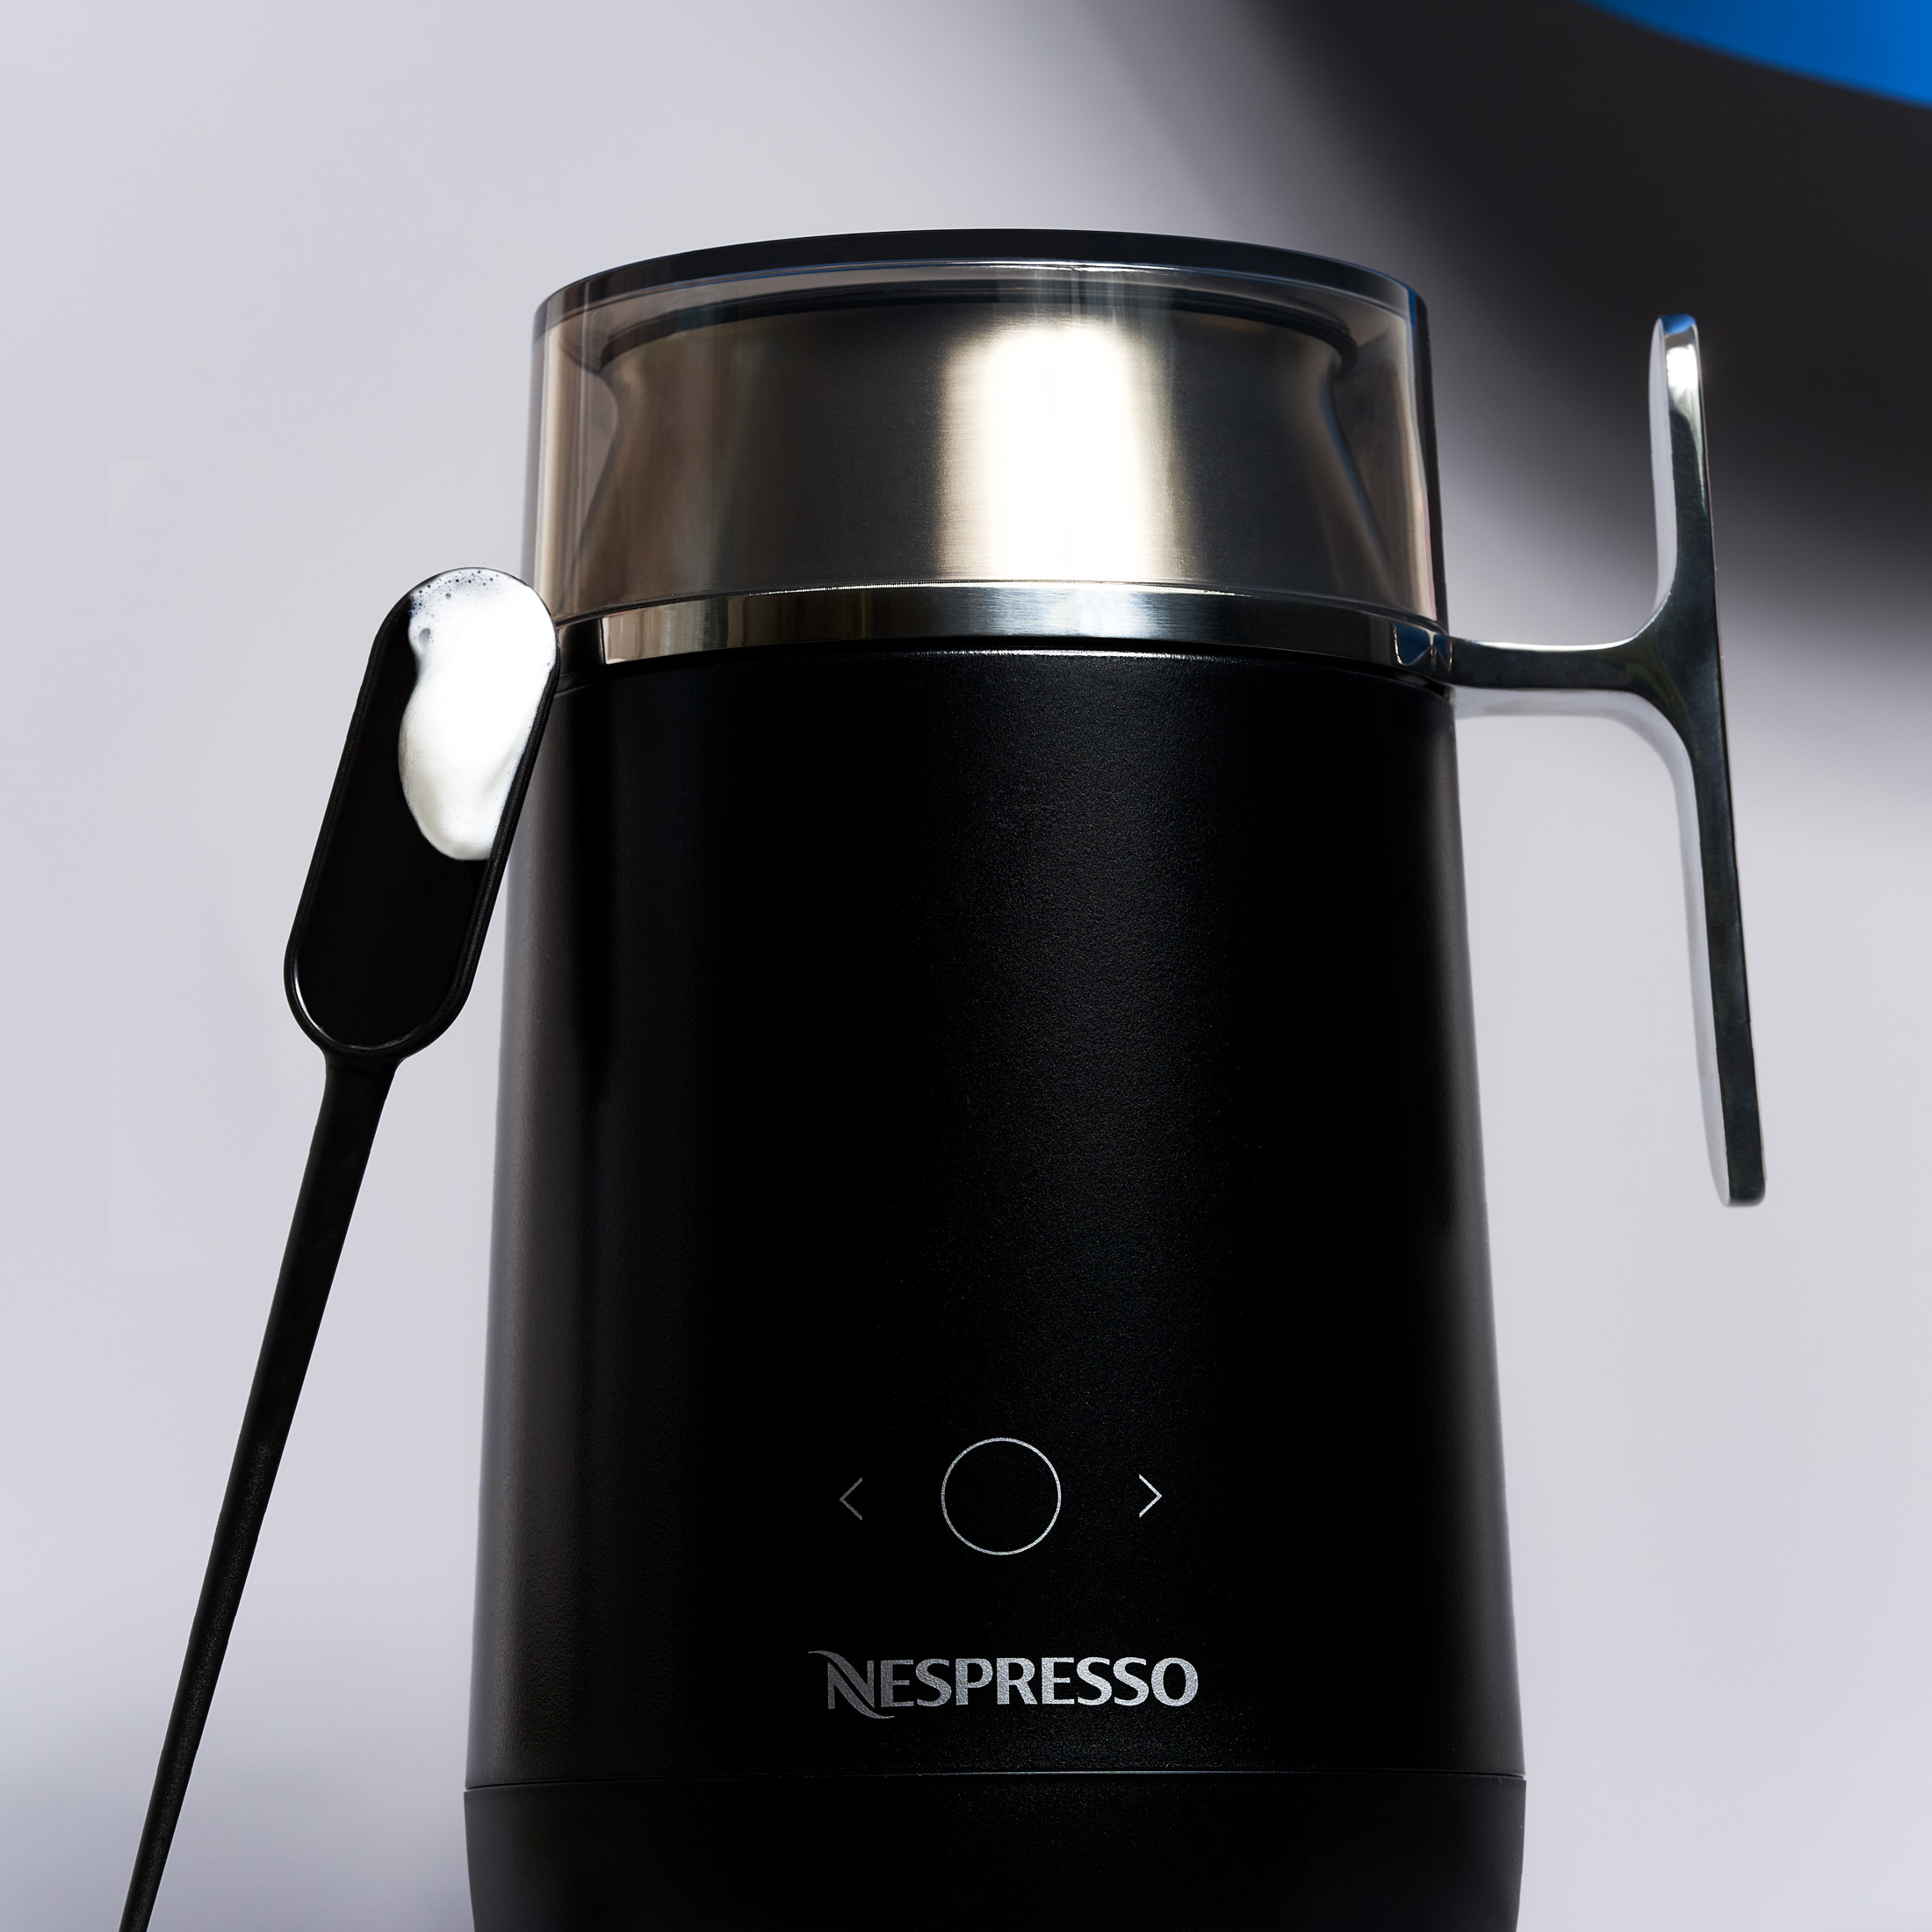 Nespresso Barista Milk Review: Cafe Coffee Drinks at Home - Bloomberg